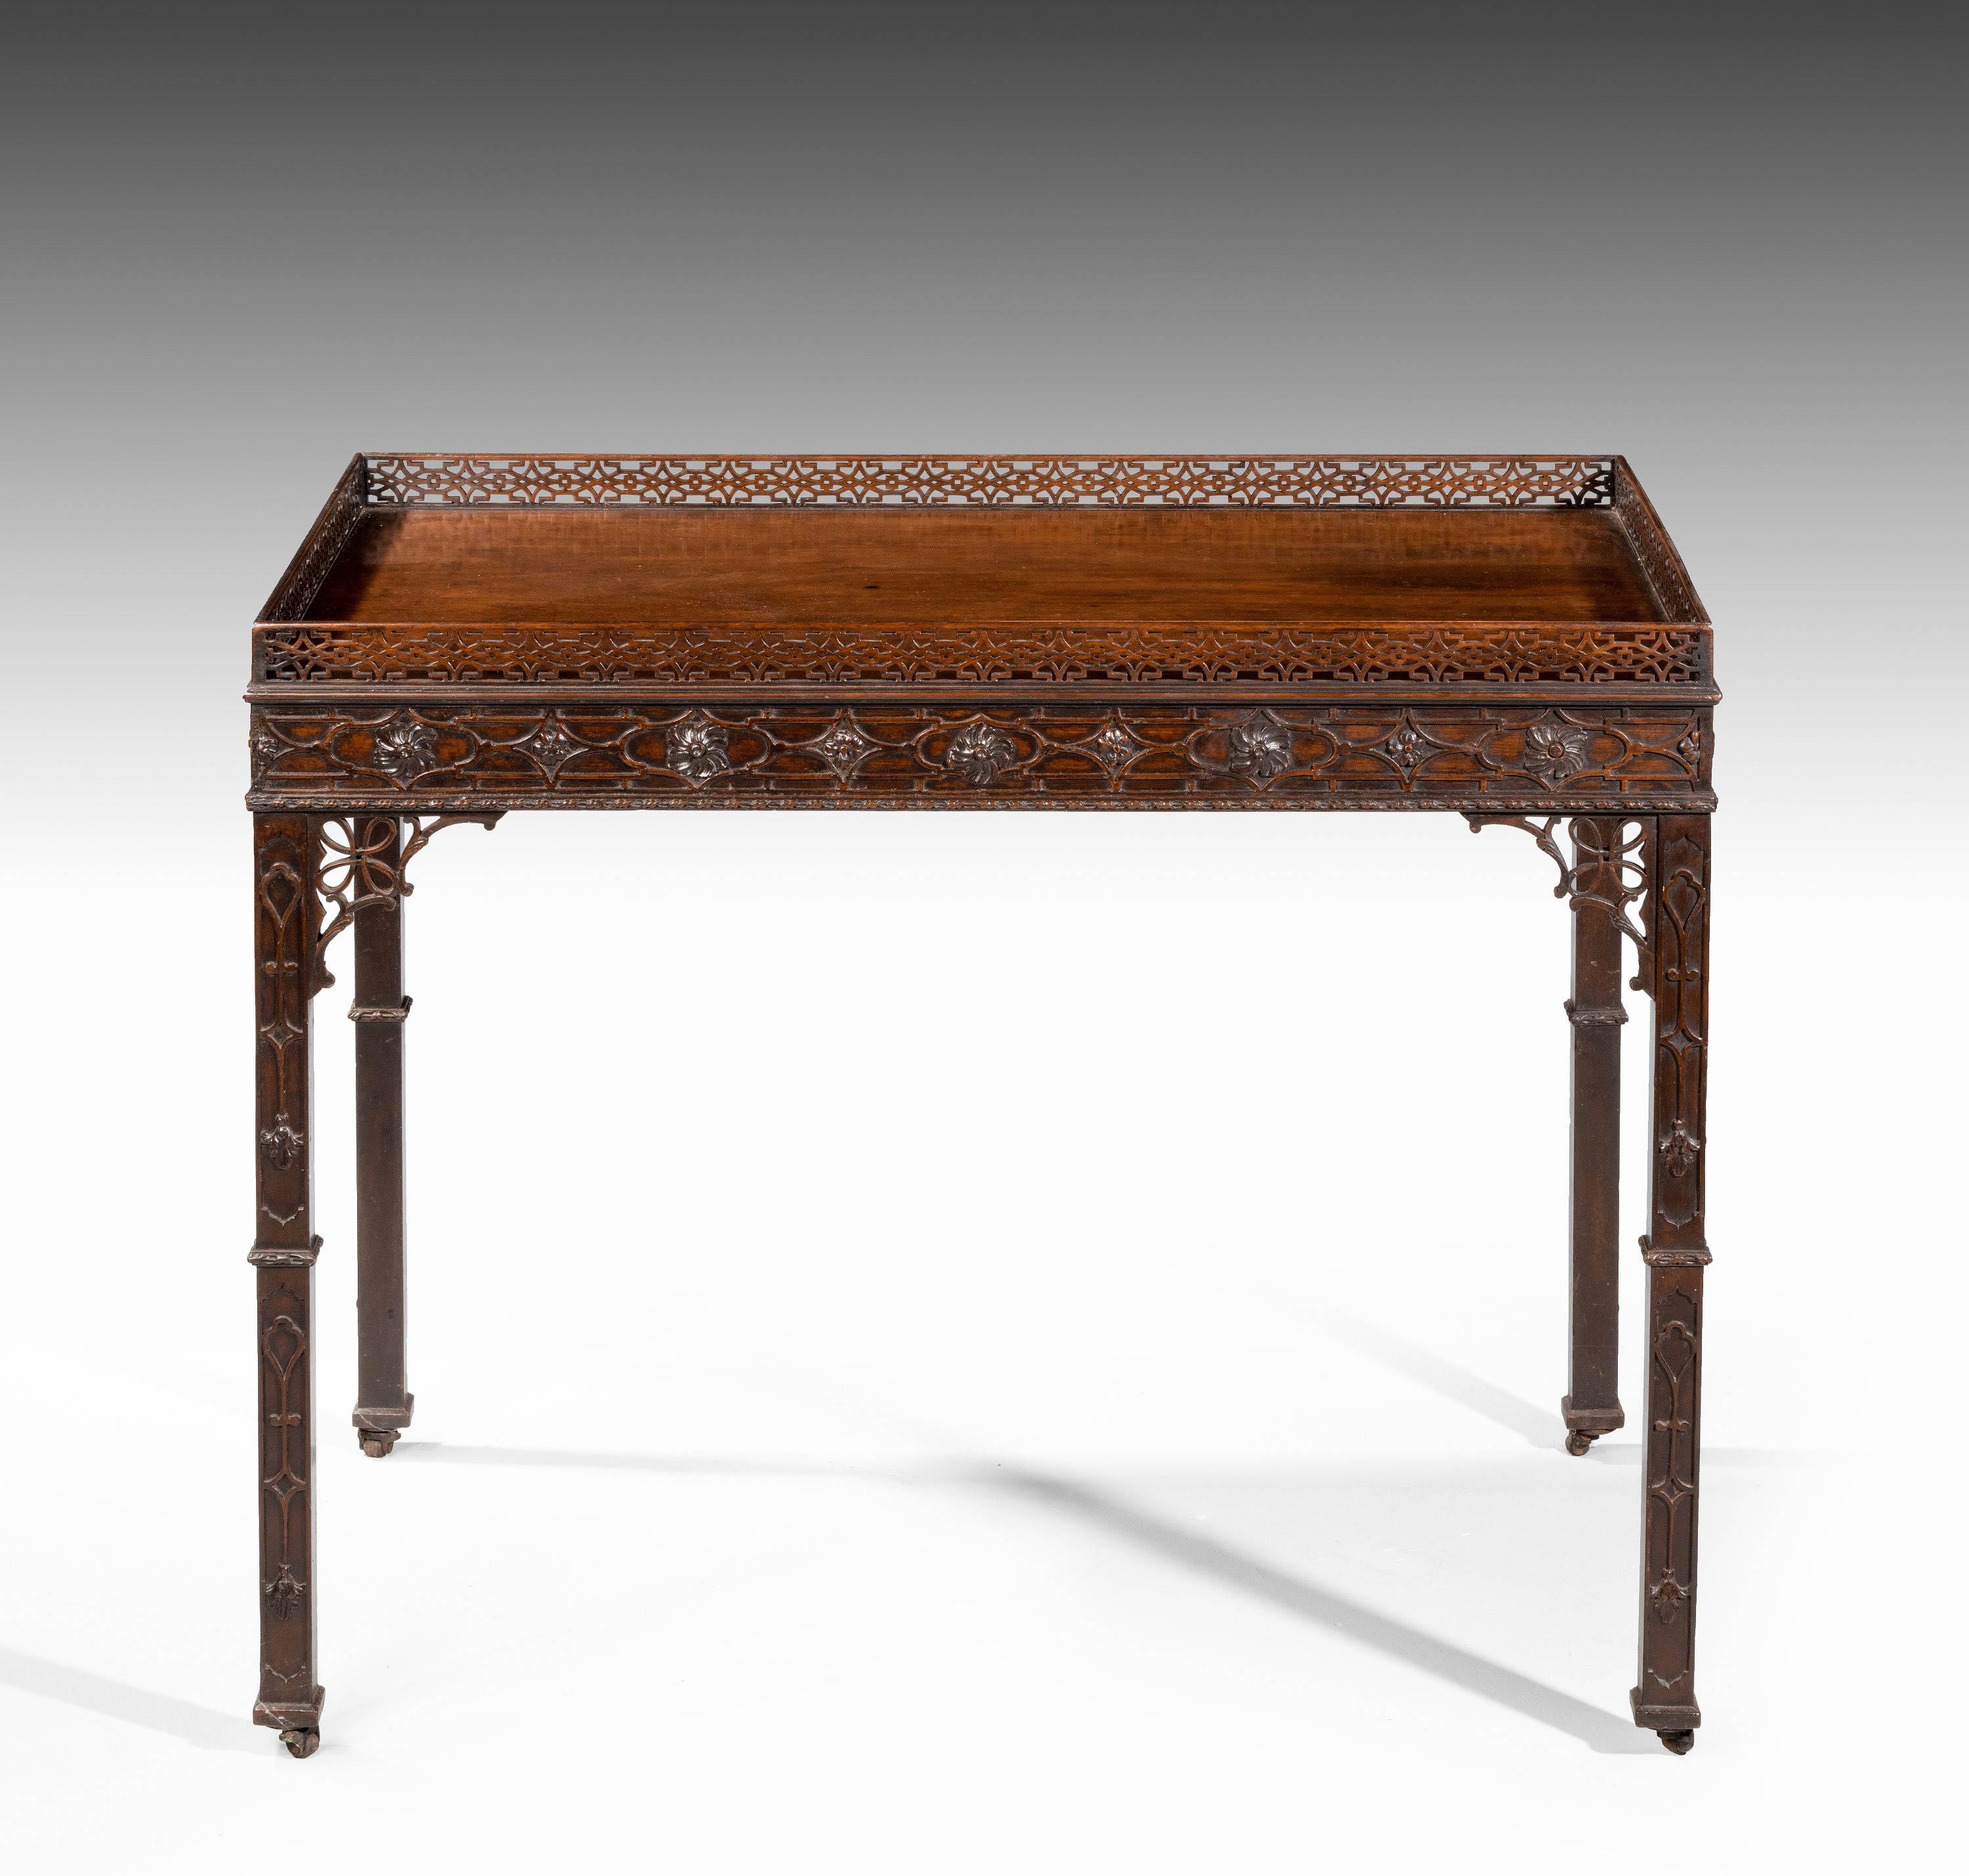 Exceptionally Fine 18th Century Chippendale Period Silver Table In Excellent Condition In Peterborough, Northamptonshire